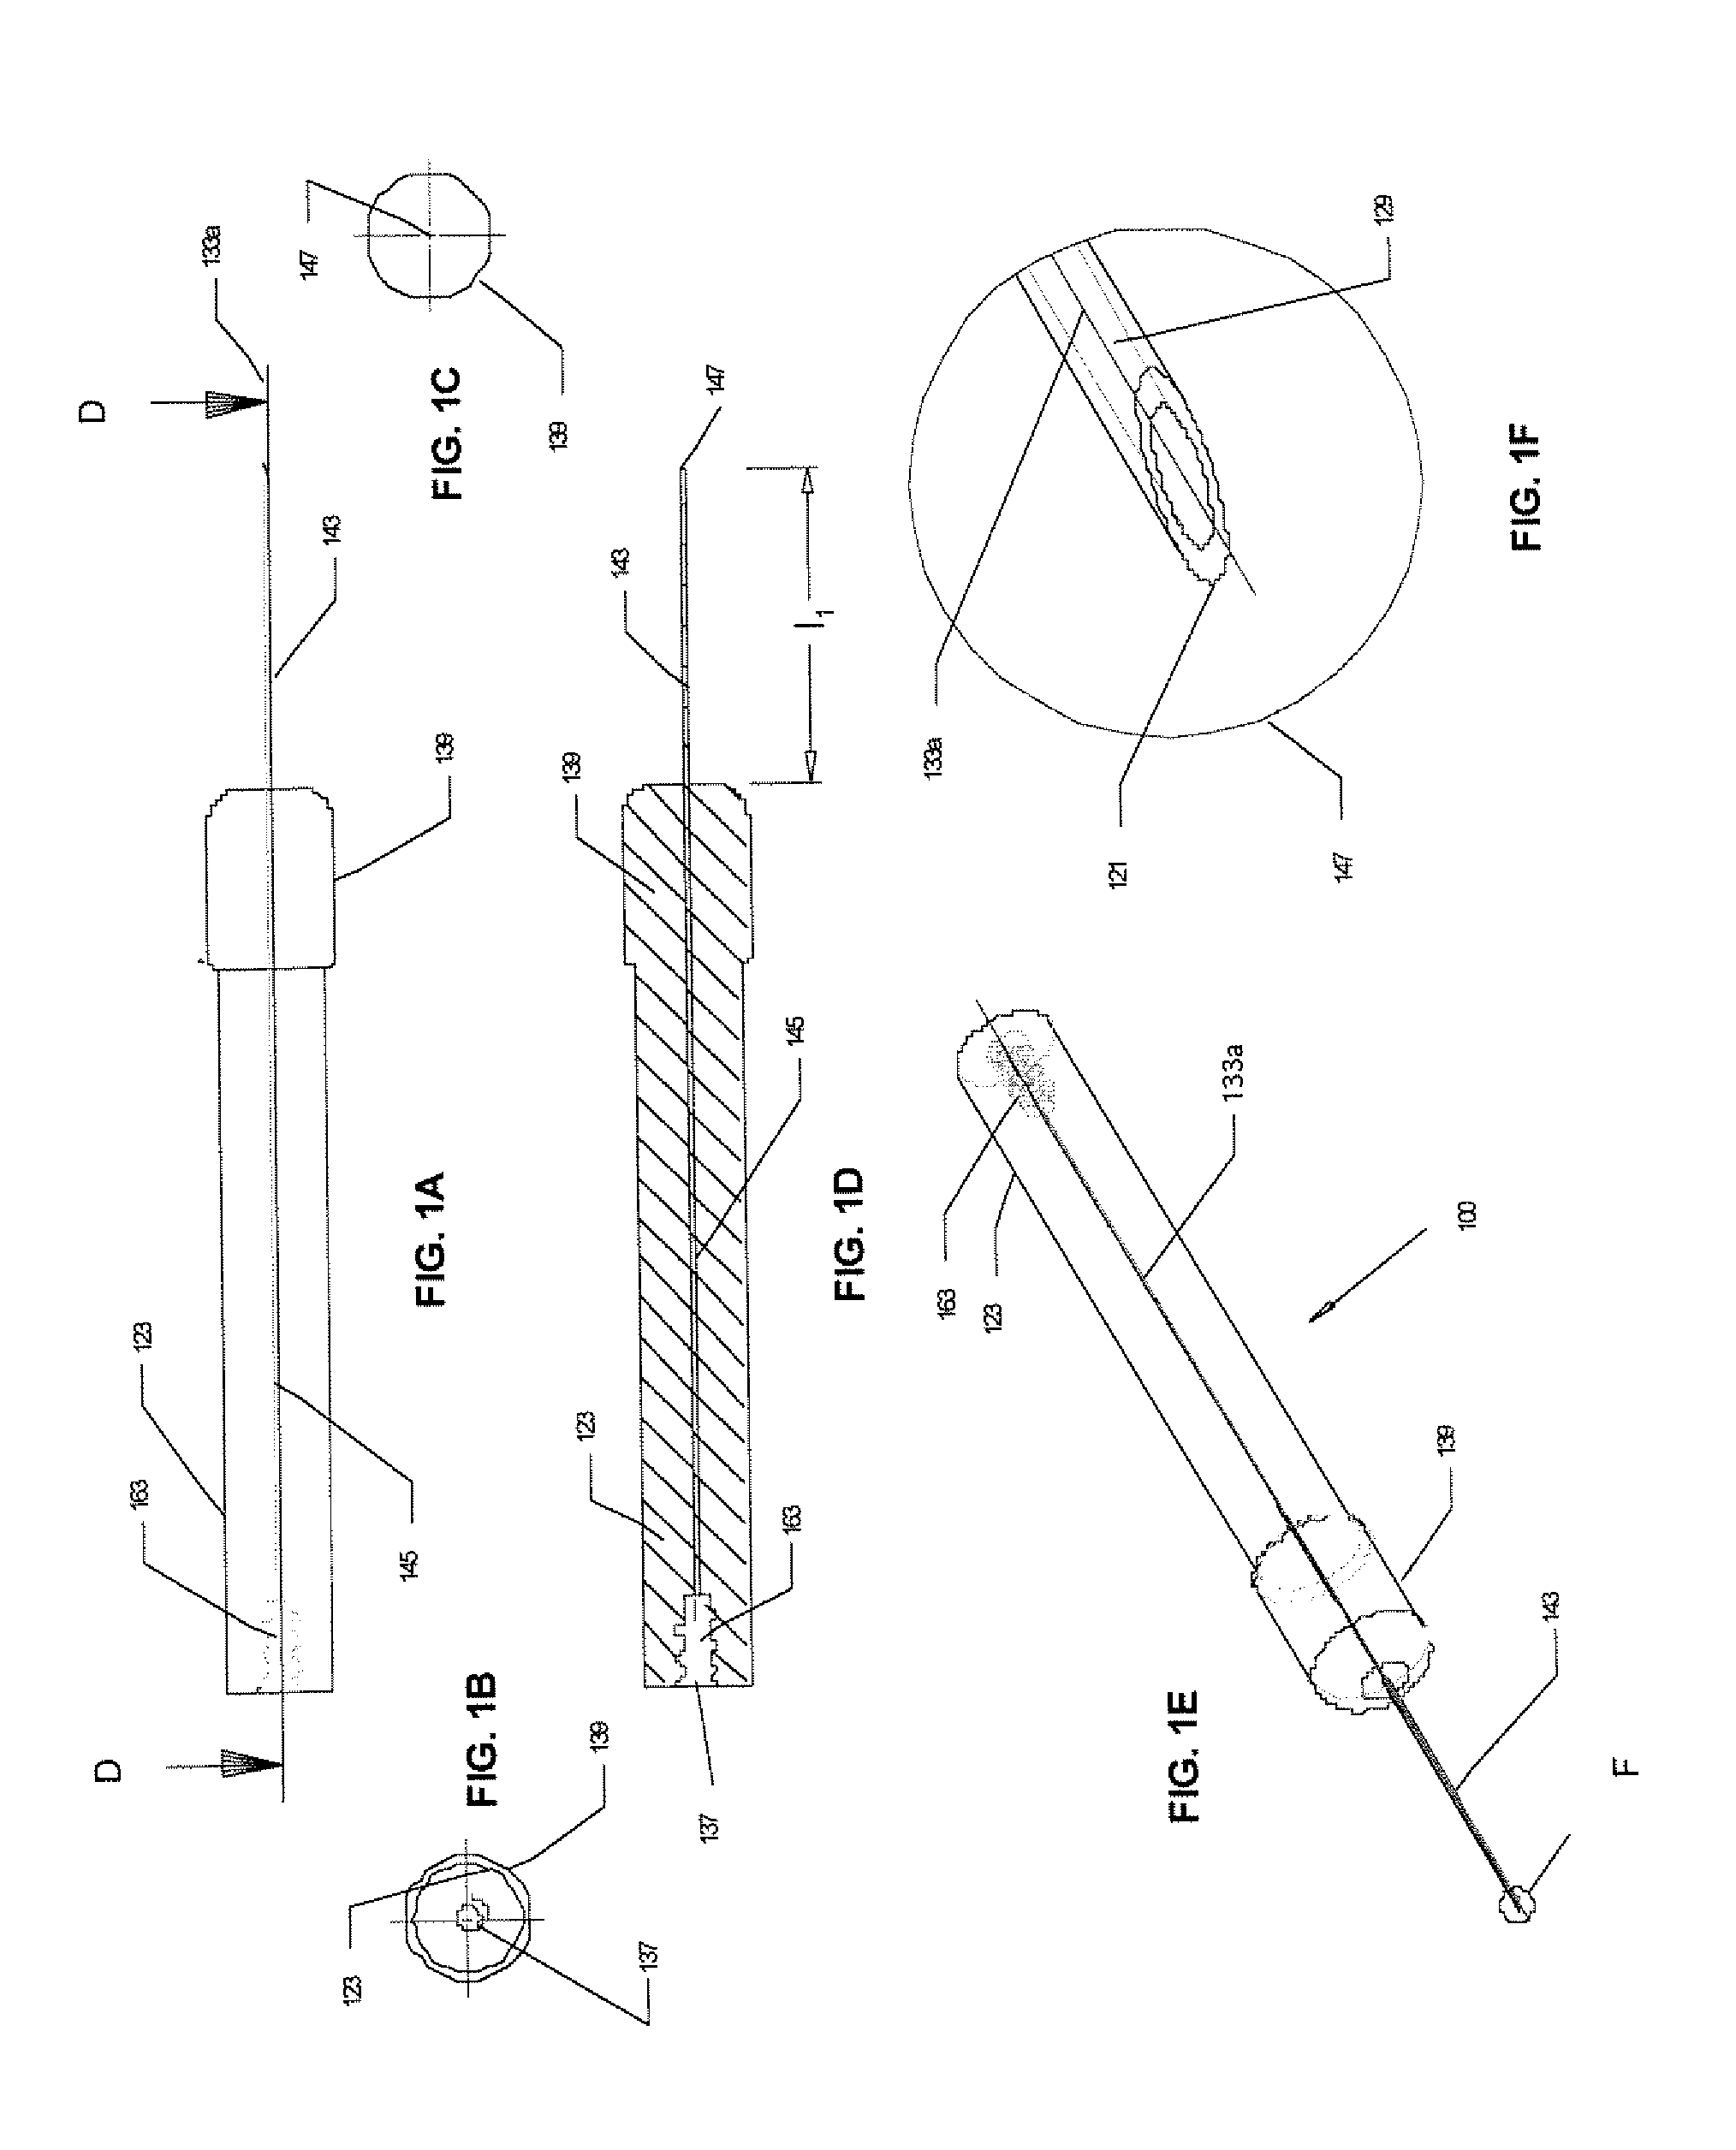 Hollow needle assembly